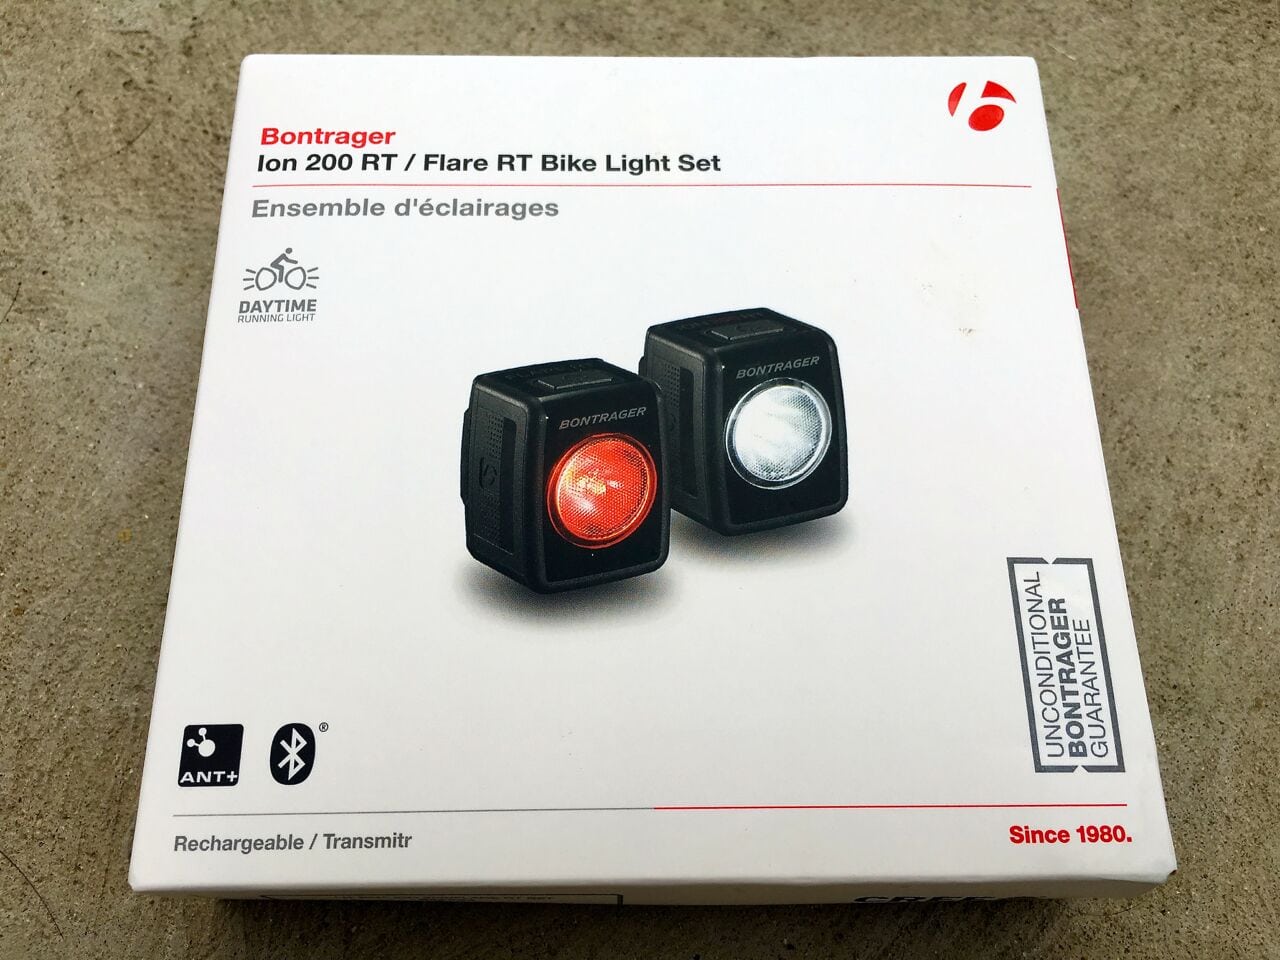 Bontrager Ion RT and Flare RT Bike Lightset review